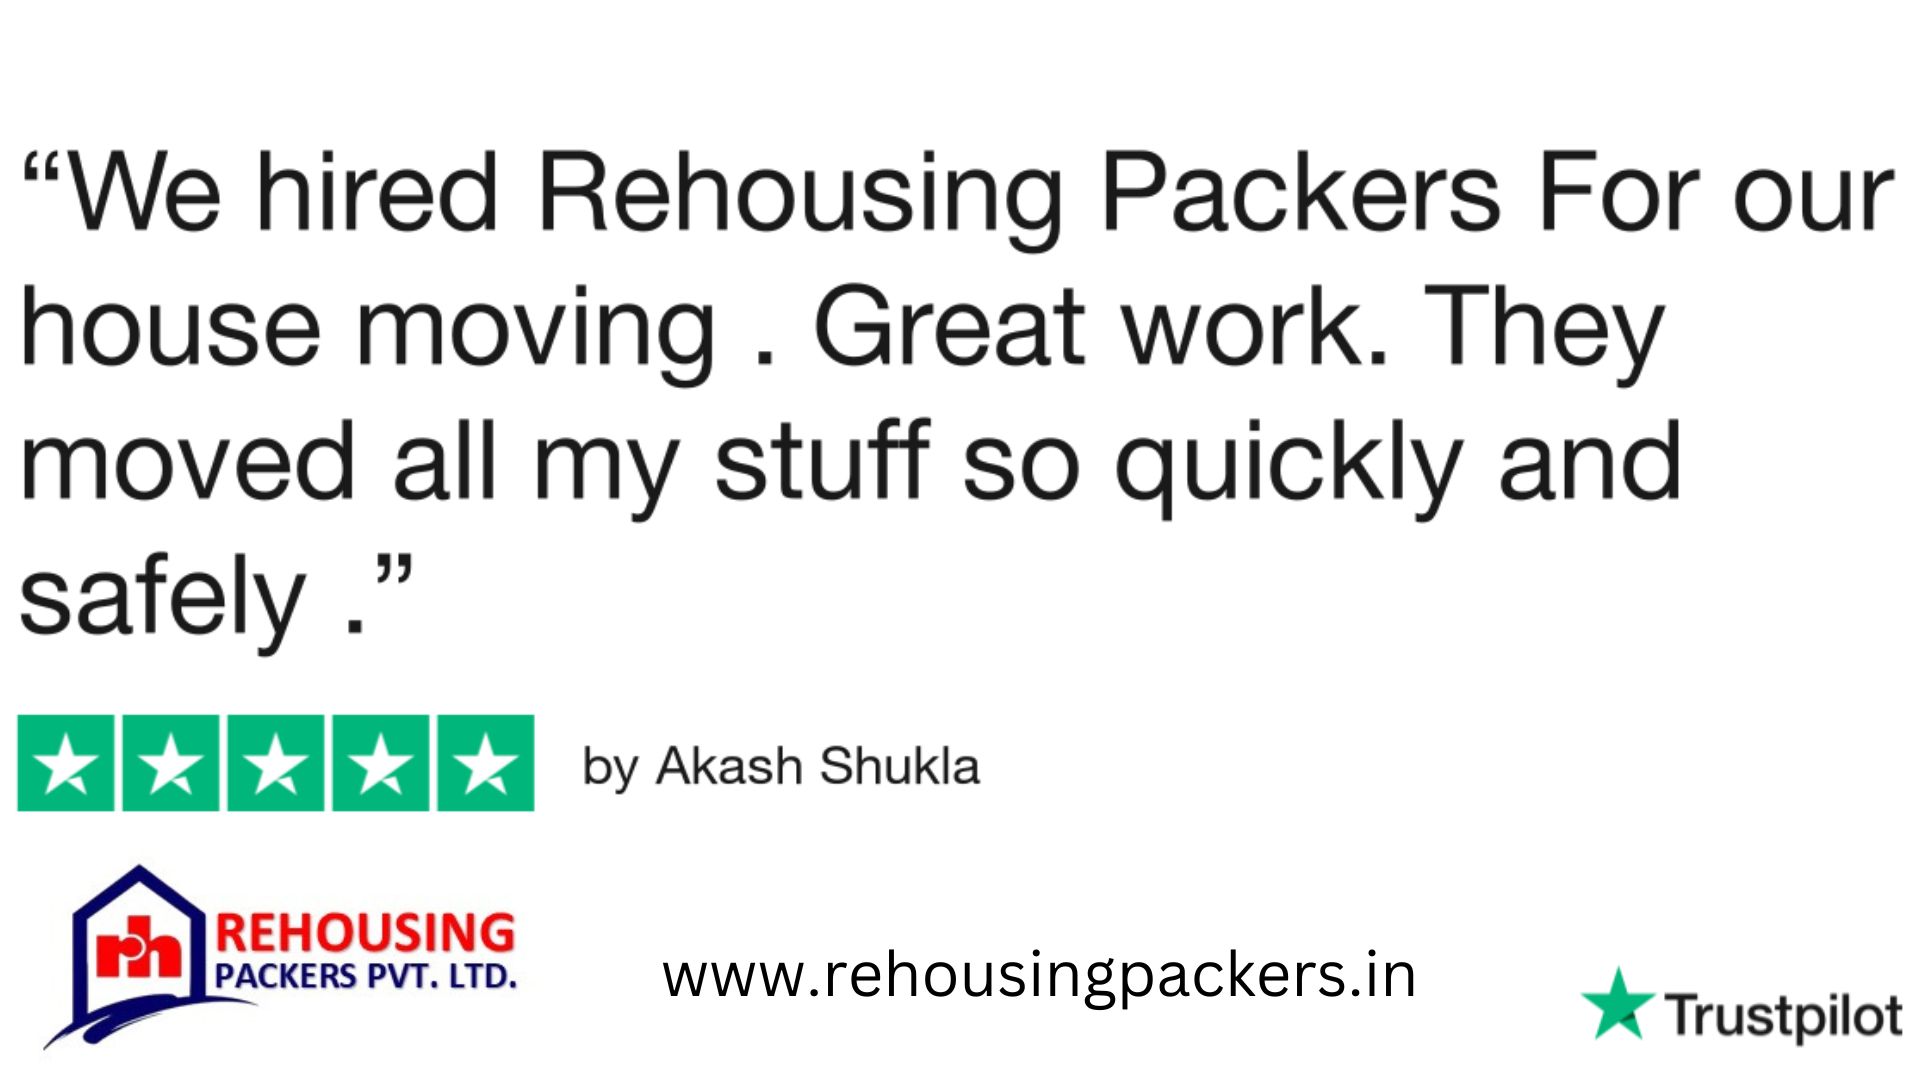 Rehousing packers and movers reviews trustpilot 5